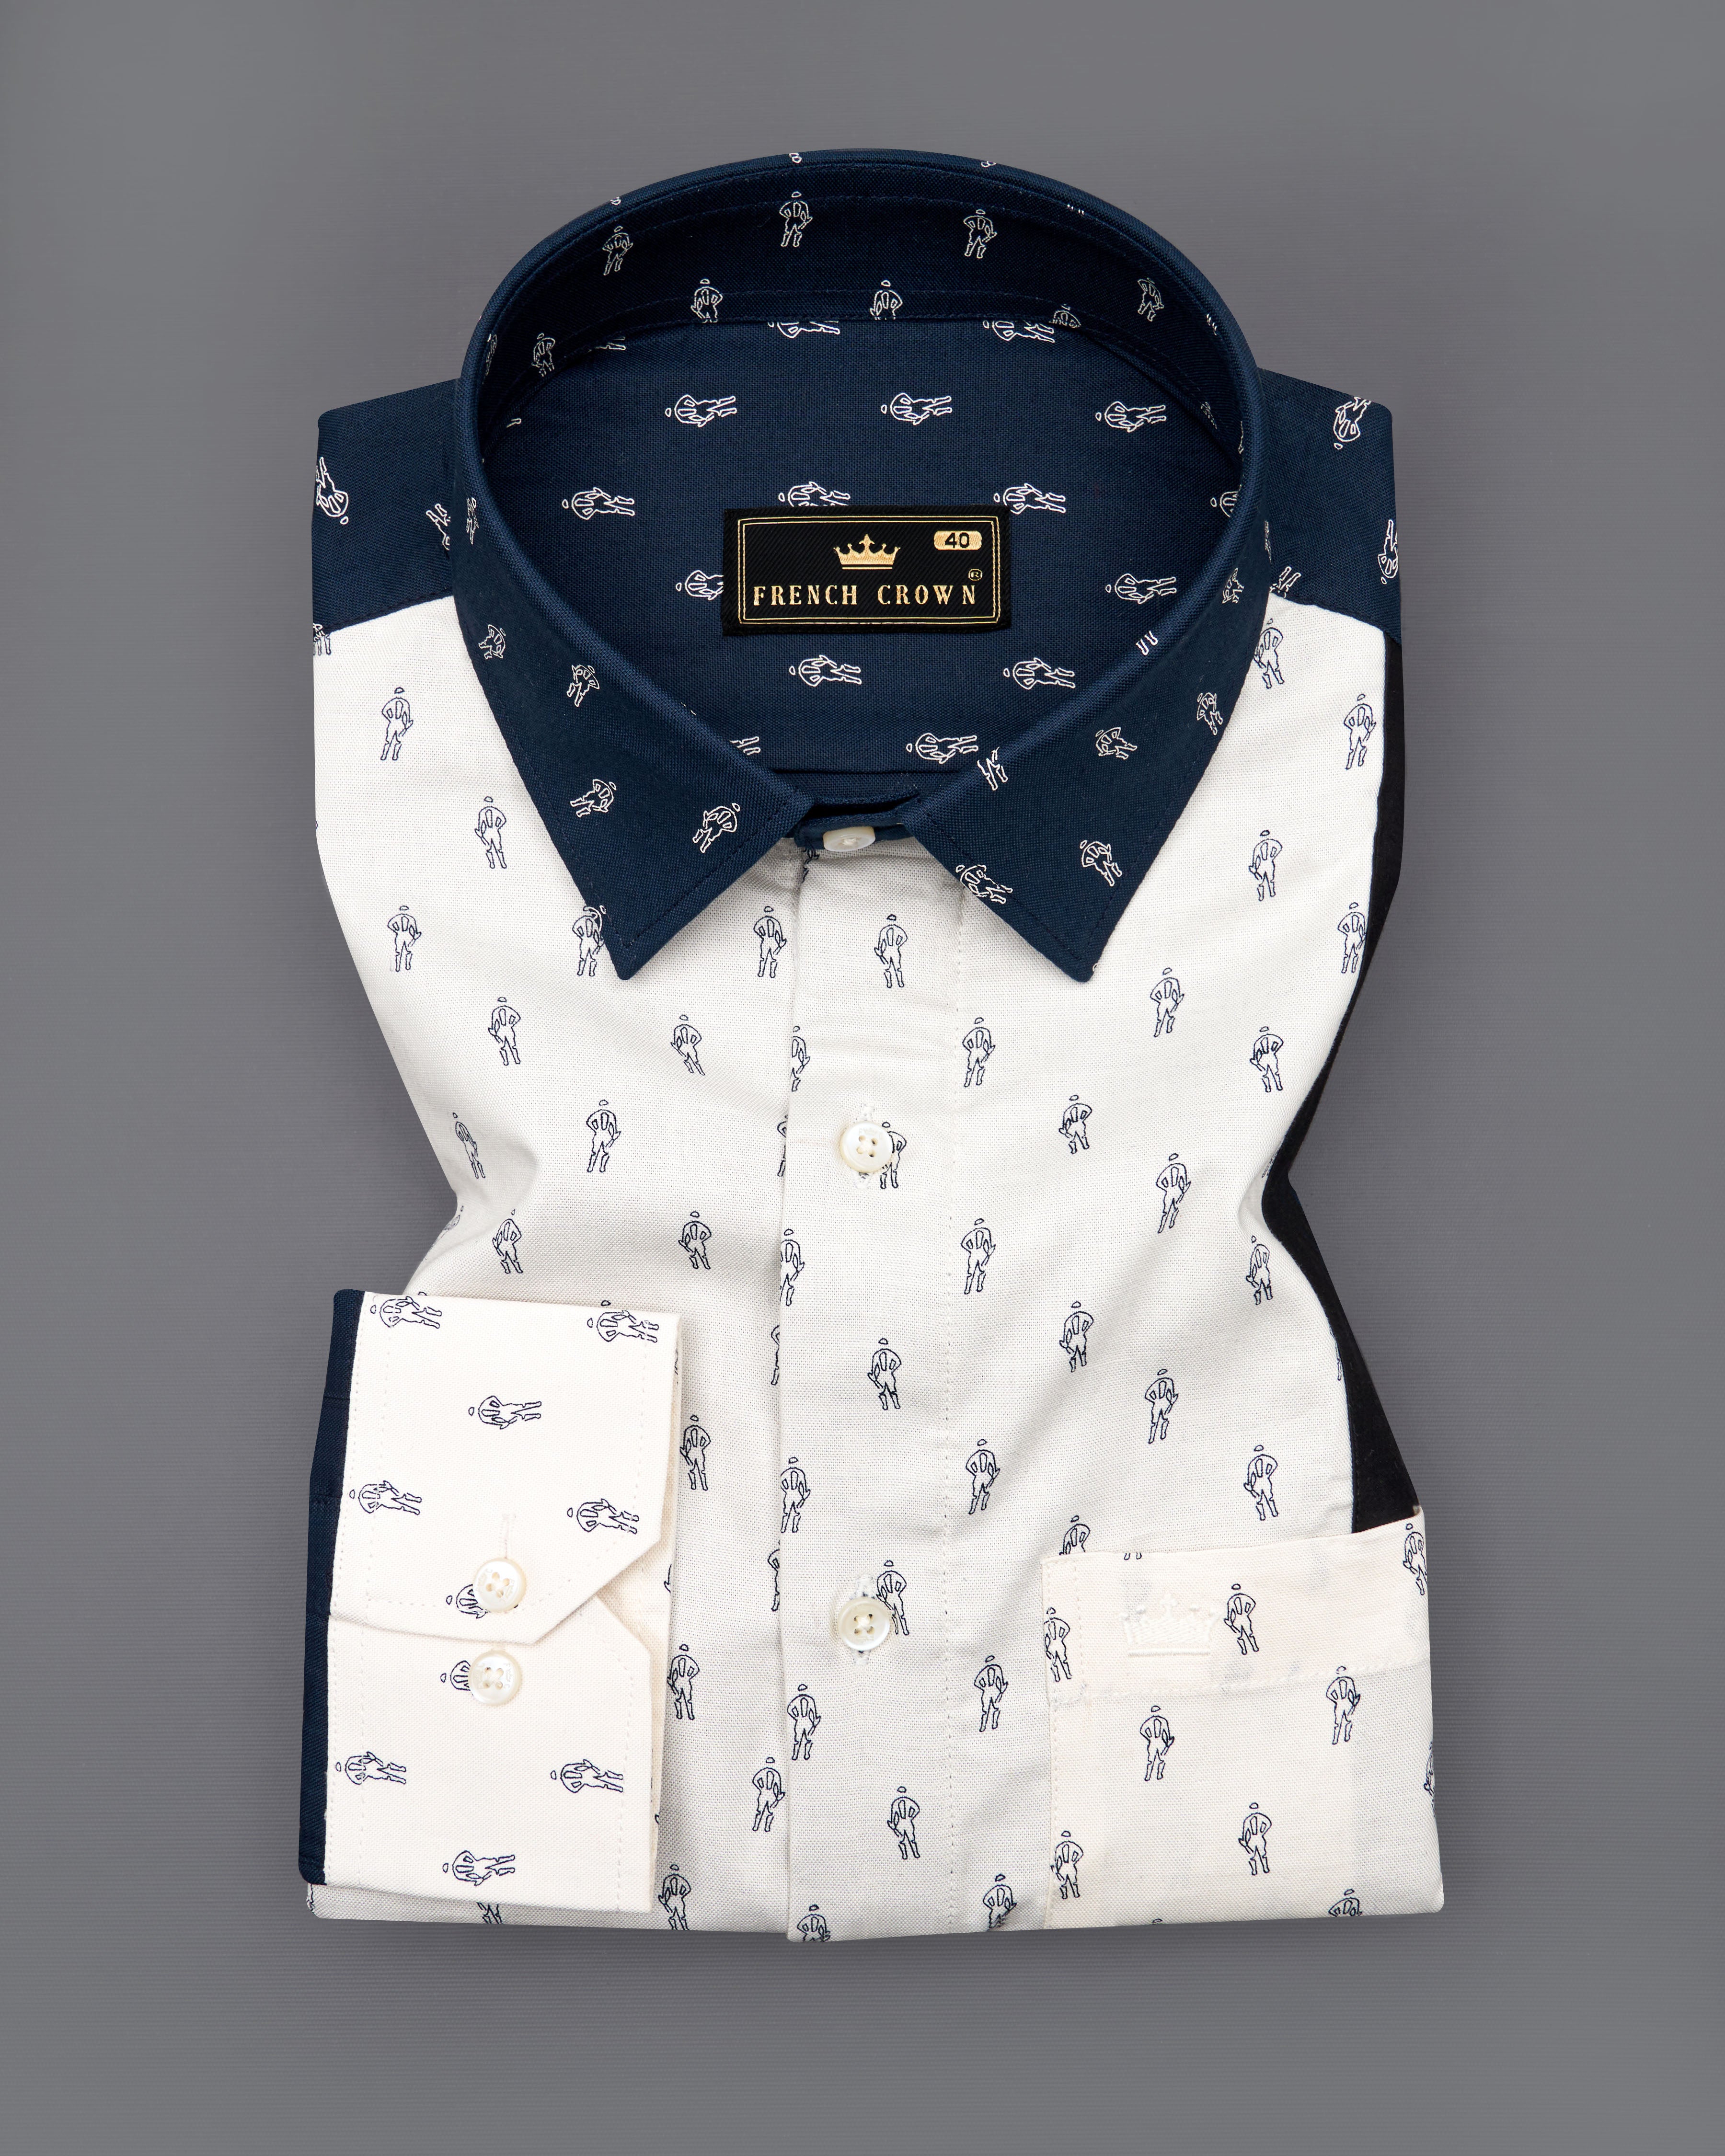 Firefly Blue with White Printed Royal Oxford Designer Shirt  8662-P415-38,8662-P415-H-38,8662-P415-39,8662-P415-H-39,8662-P415-40,8662-P415-H-40,8662-P415-42,8662-P415-H-42,8662-P415-44,8662-P415-H-44,8662-P415-46,8662-P415-H-46,8662-P415-48,8662-P415-H-48,8662-P415-50,8662-P415-H-50,8662-P415-52,8662-P415-H-52